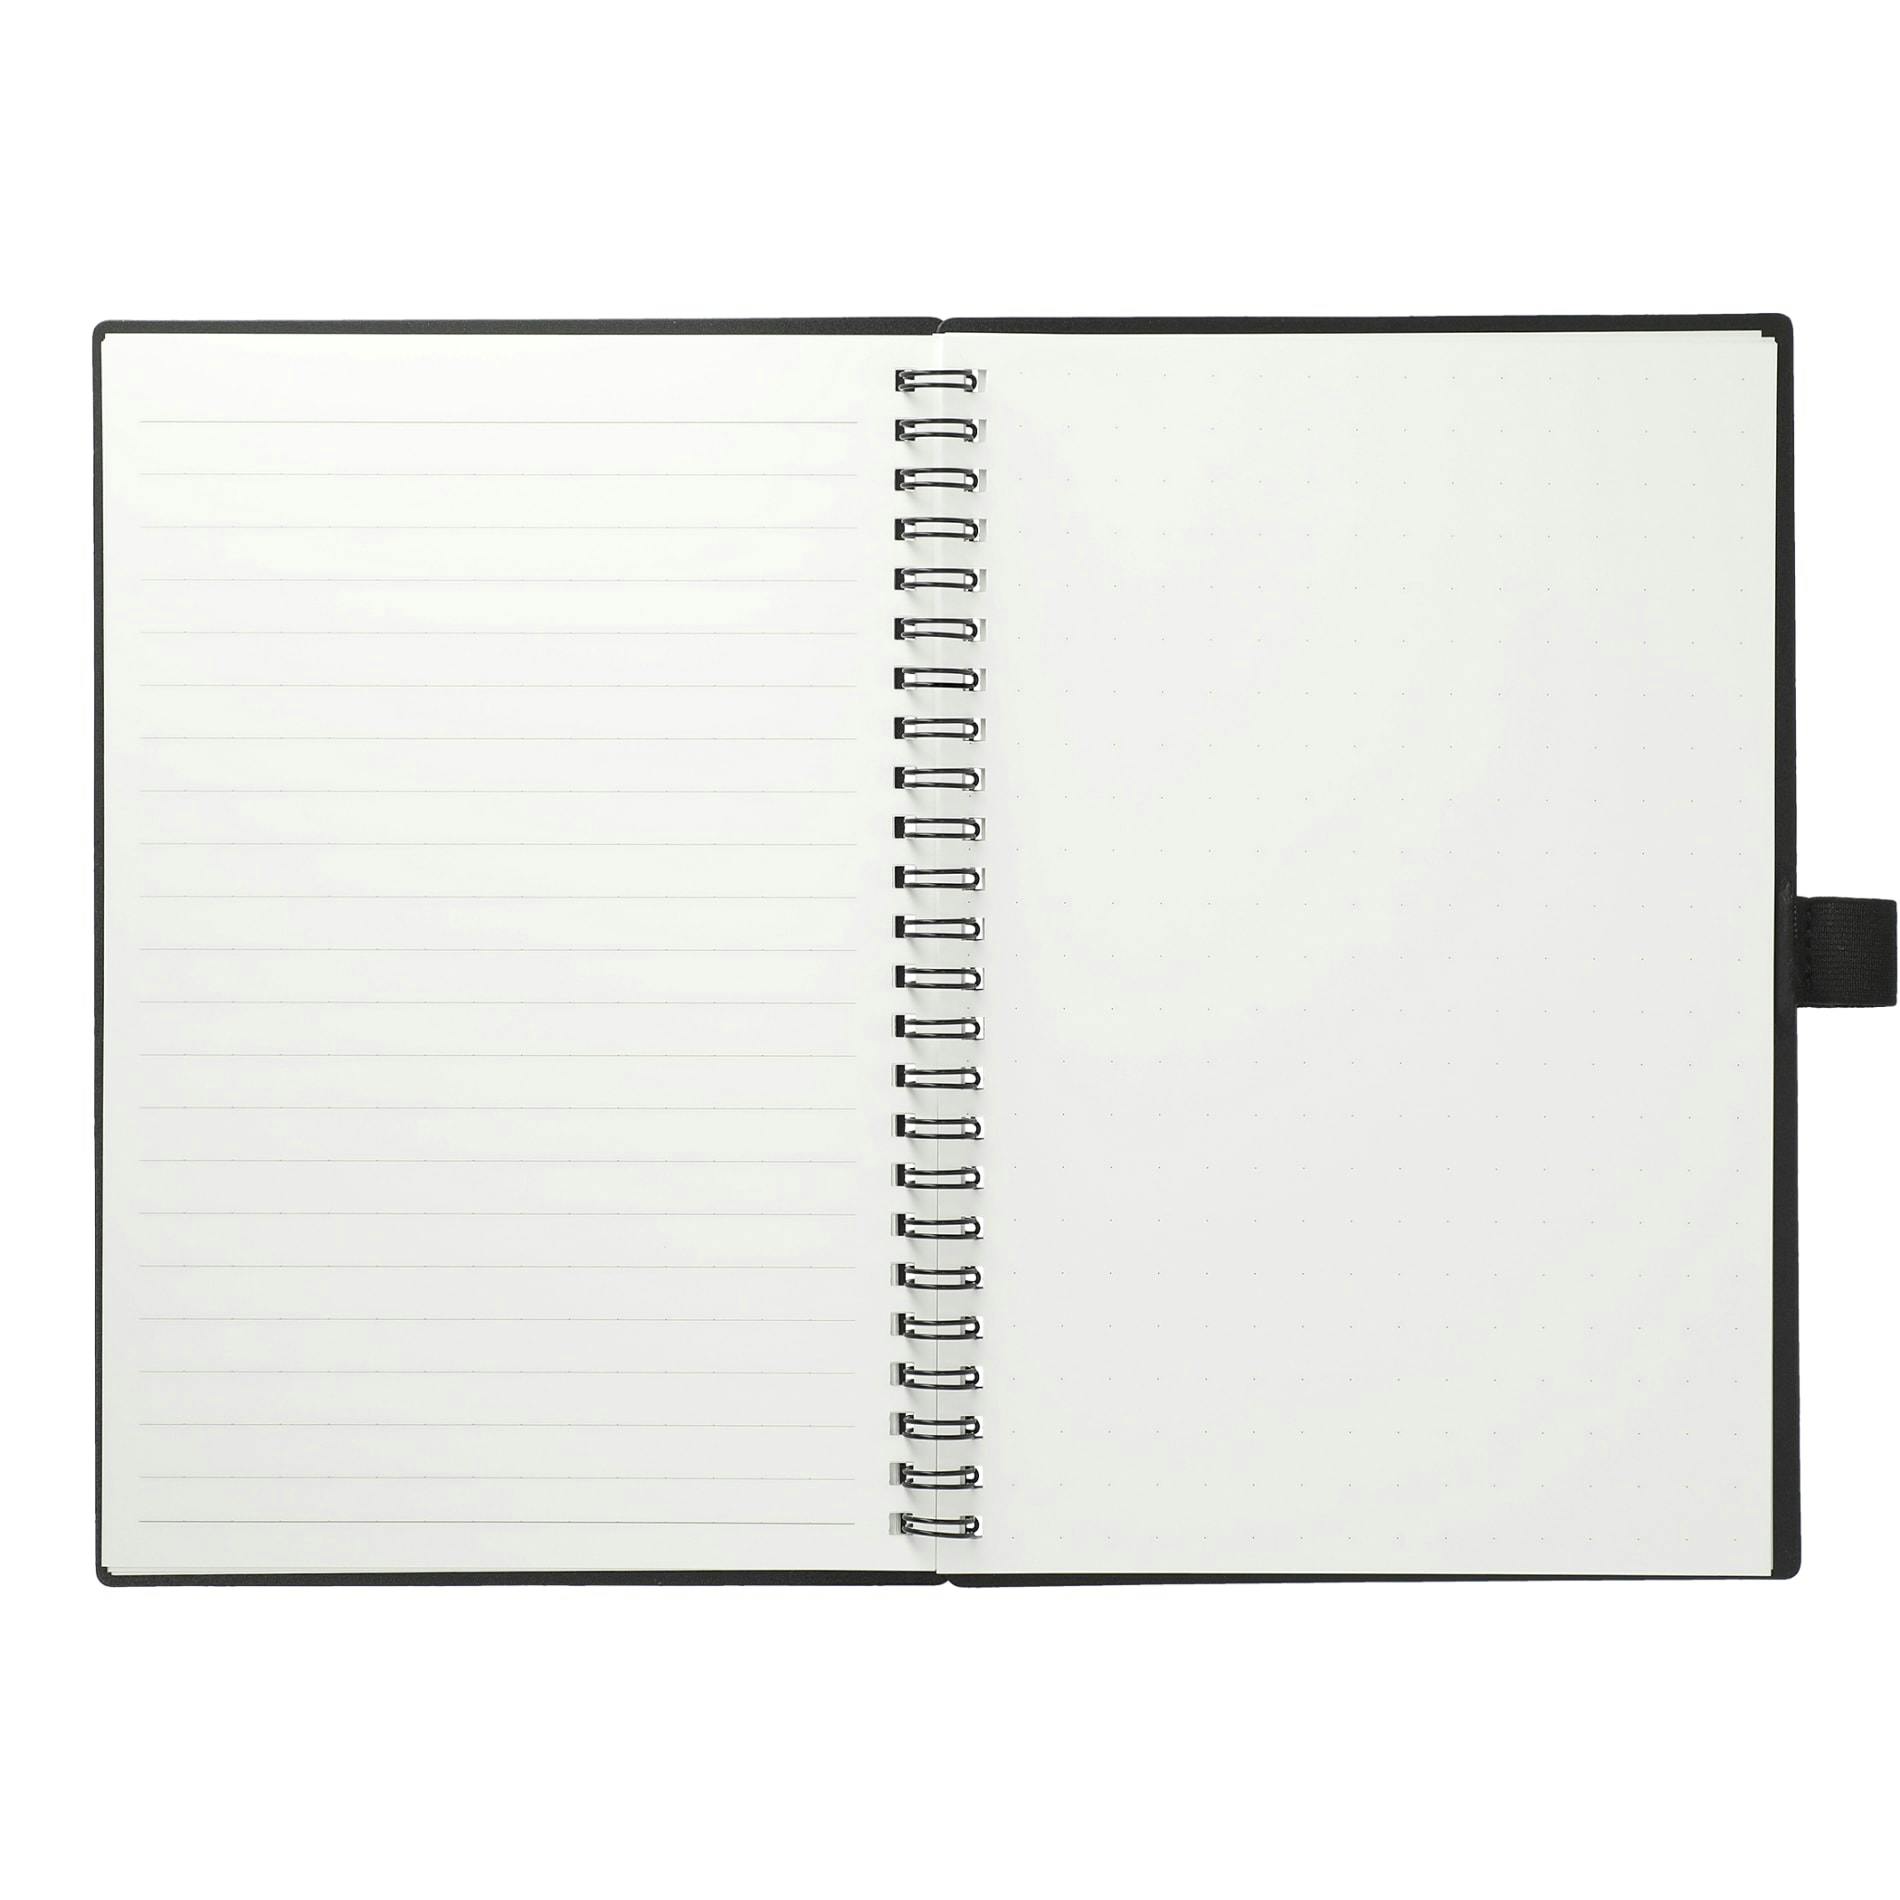 5.7" x 8.5" FUNCTION Erasable Notebook - additional Image 6